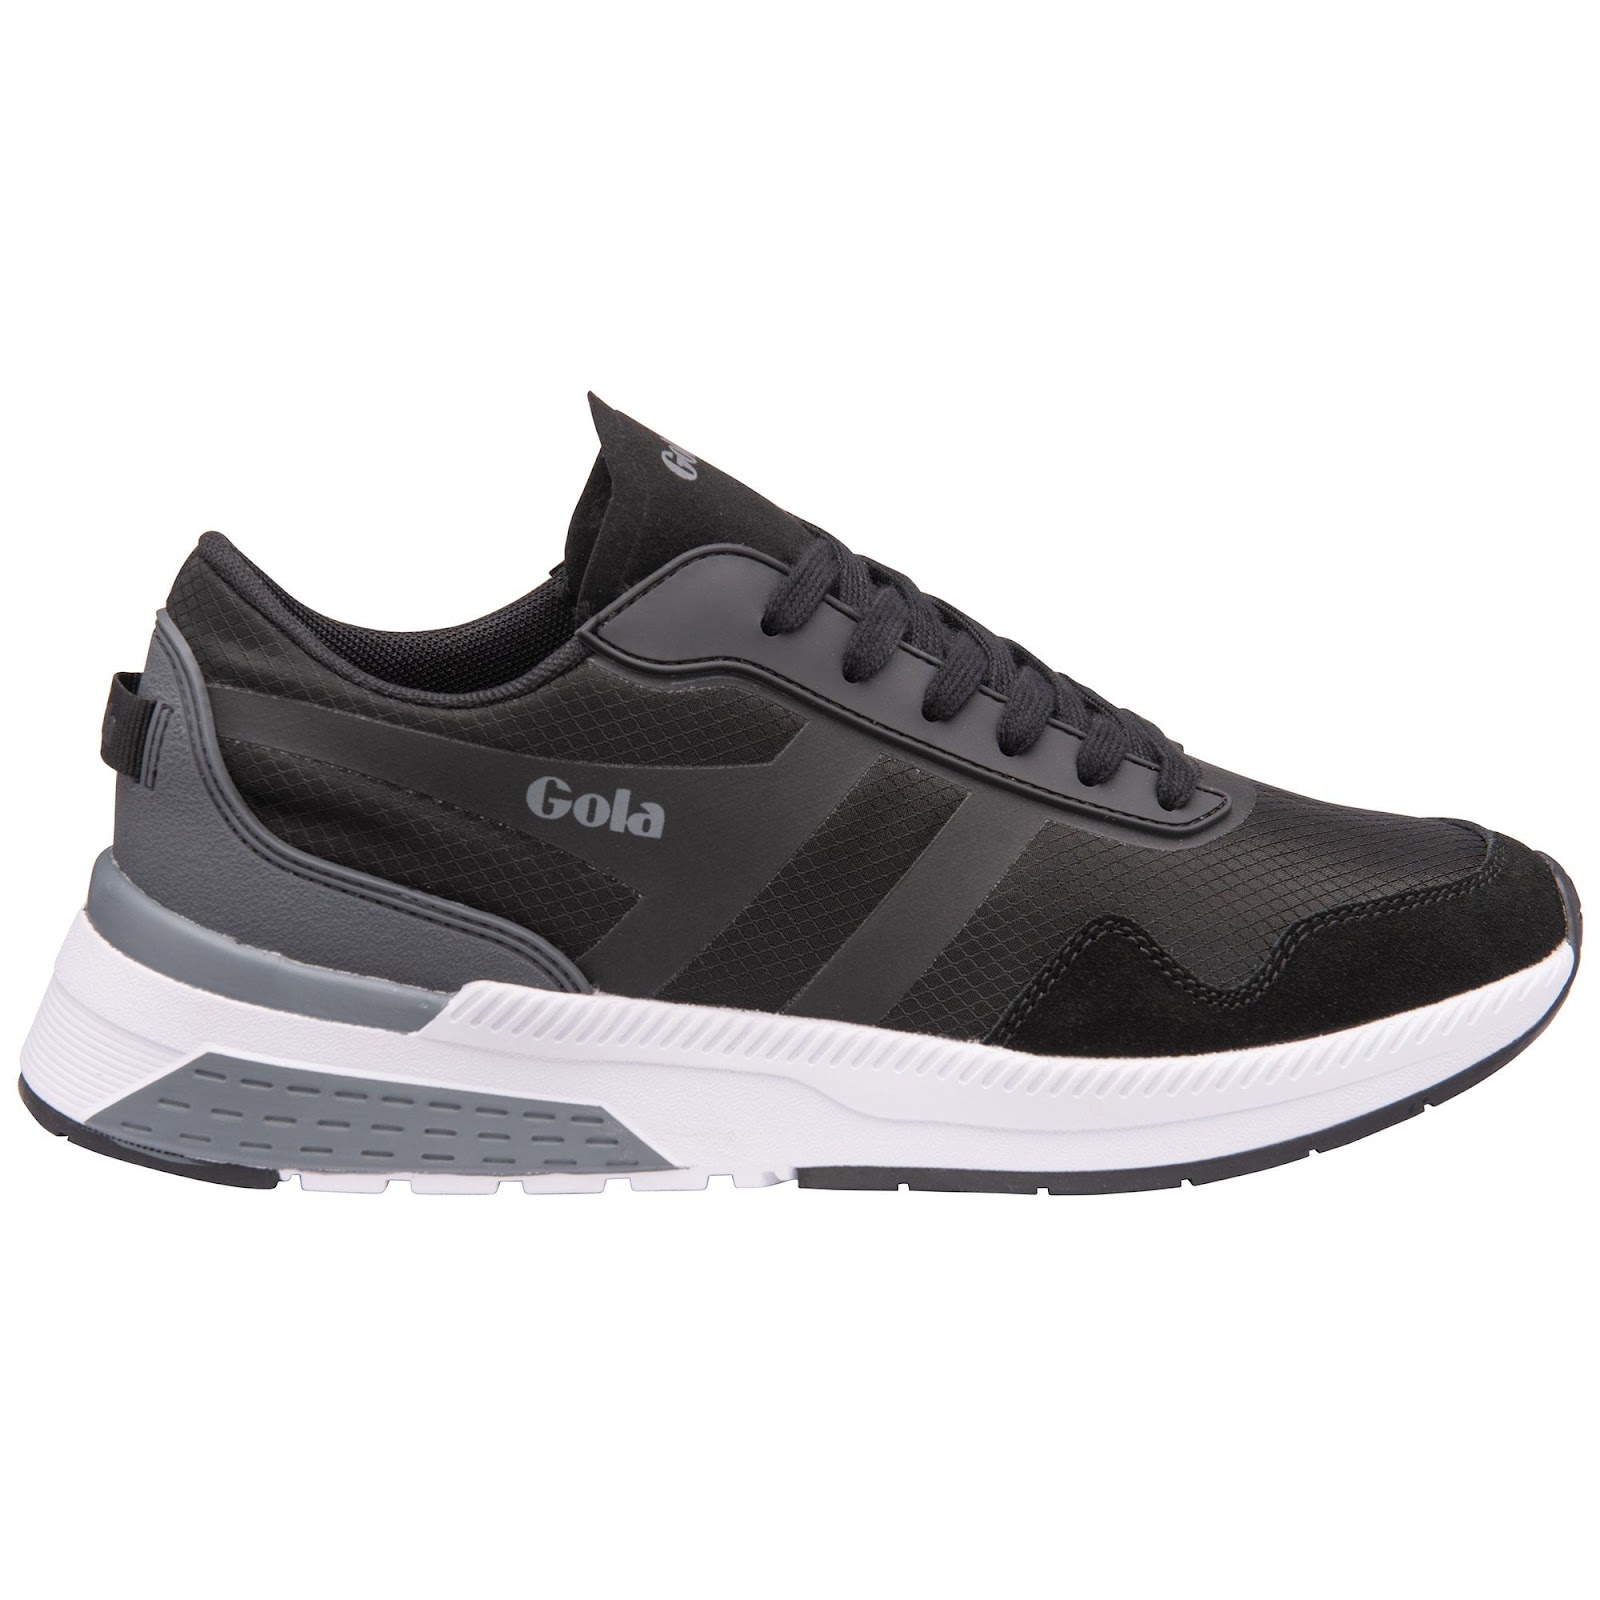 Men's black sporty Gola trainers with white soles